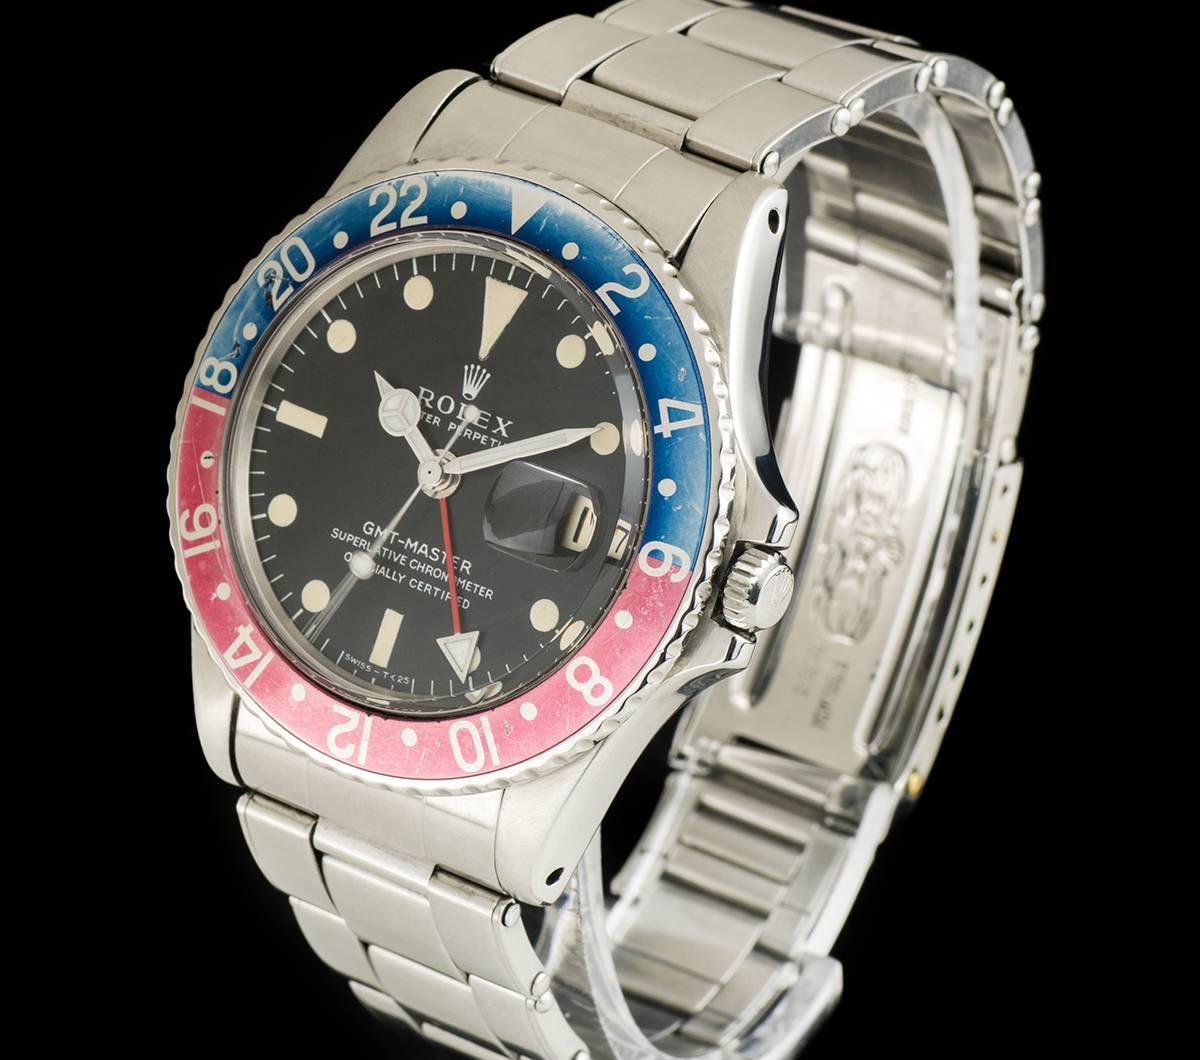 A Stainless Steel Pepsi Bezel GMT-Master Vintage Gents Wristwatch, rare original long E matte black dial with hour markers, date at 3 0'clock, a stainless steel bi-directional rotating bezel with a blue and red "pepsi" insert, a rare